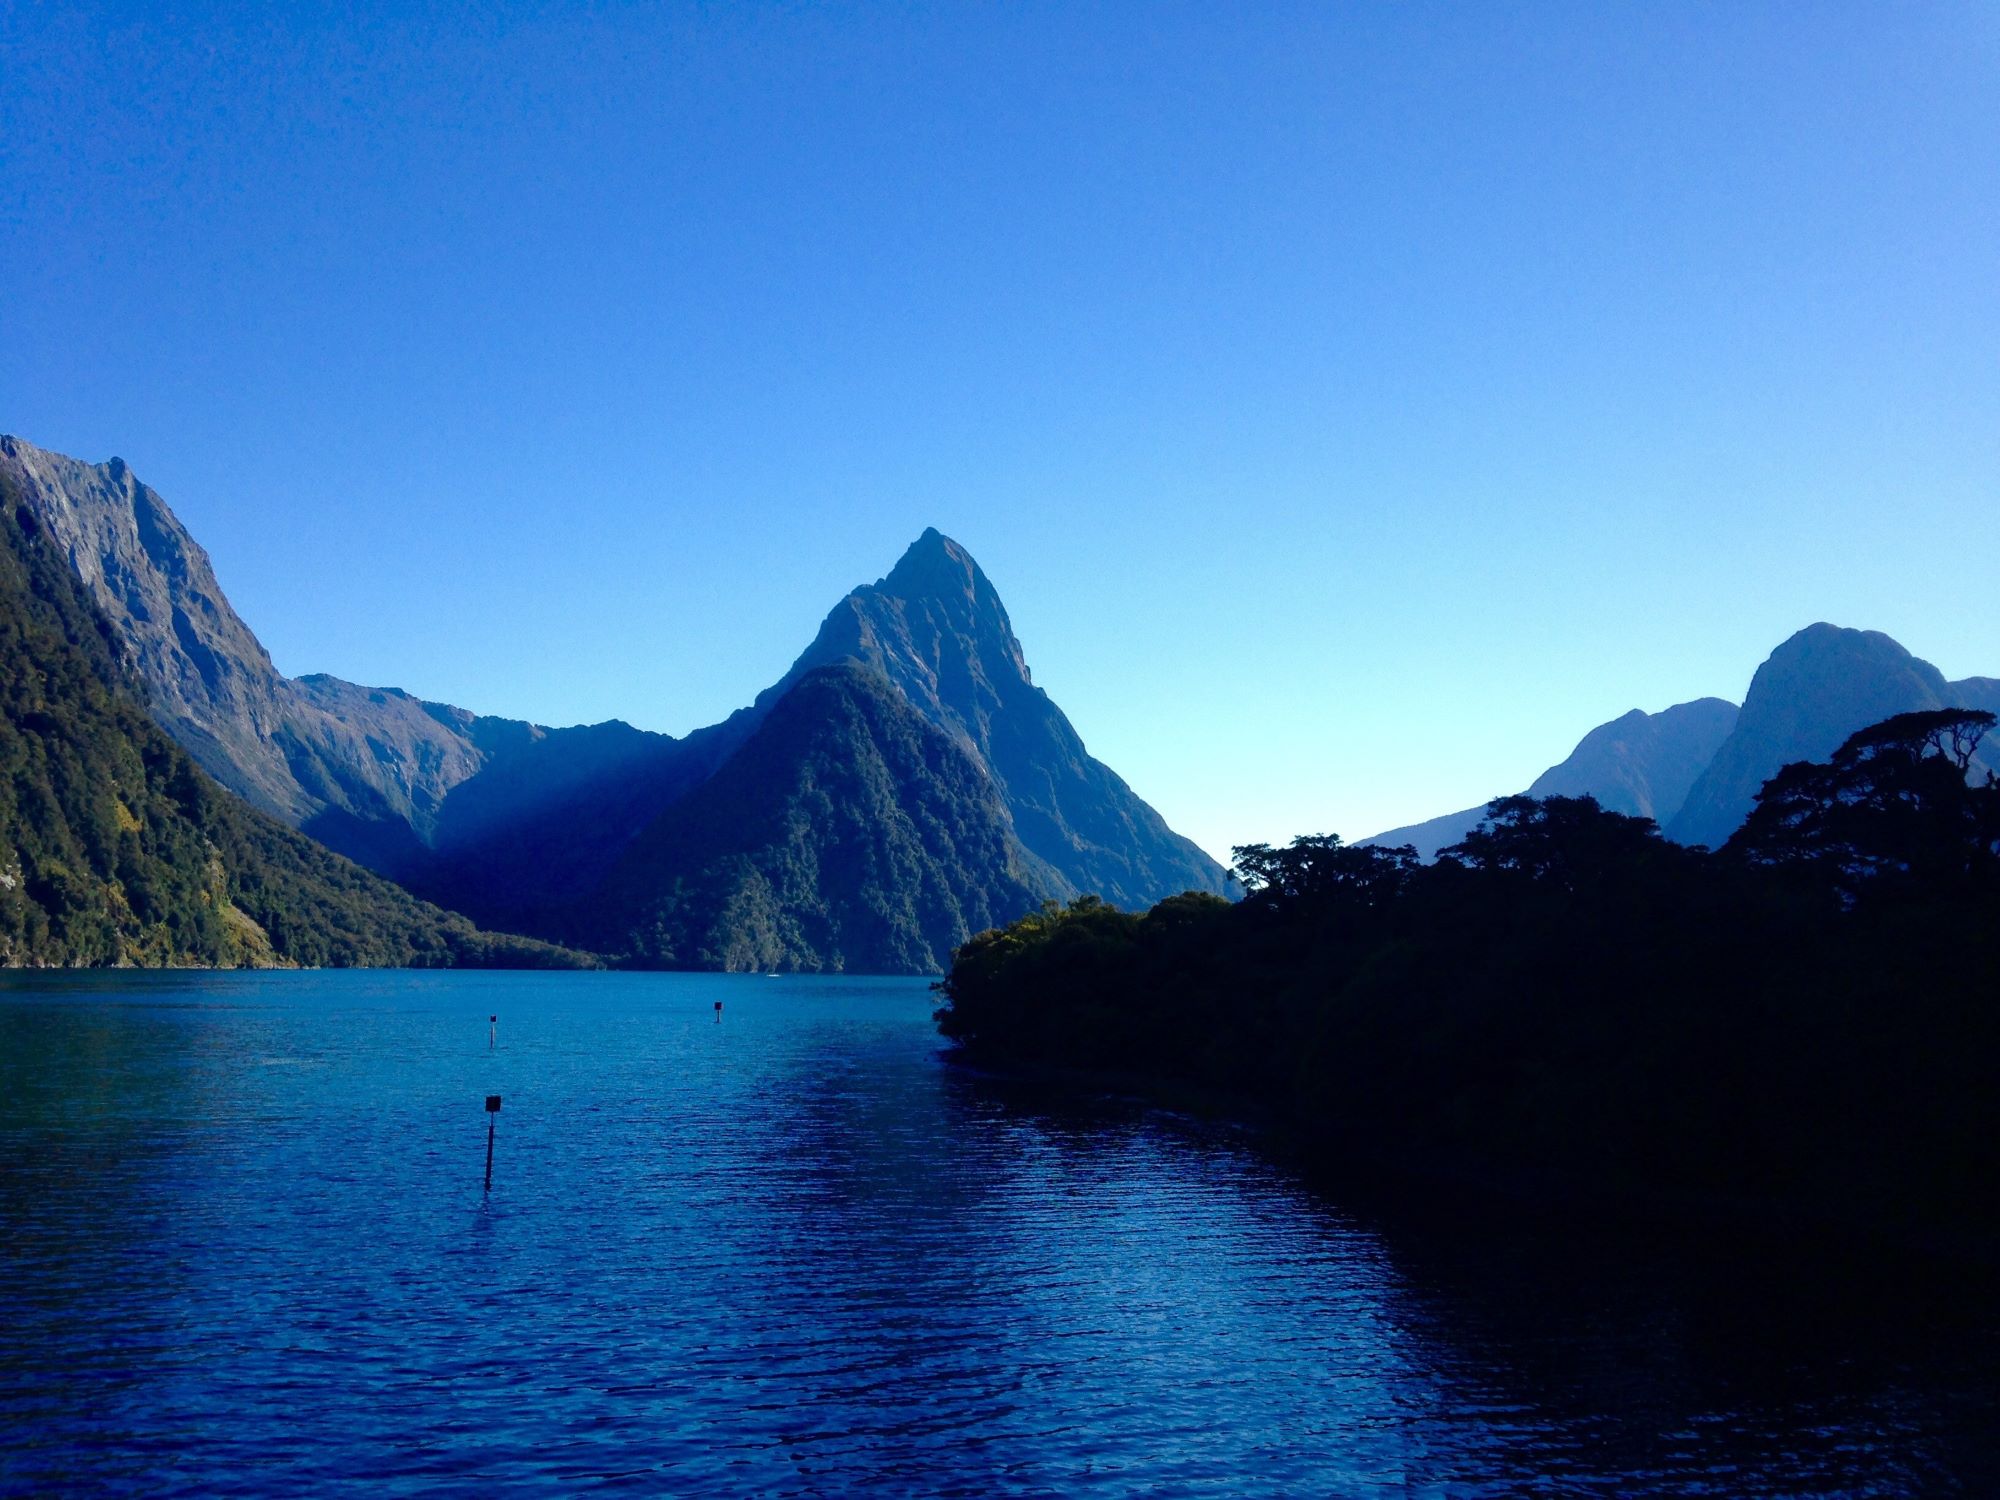 Blue sky day at Milford Sound